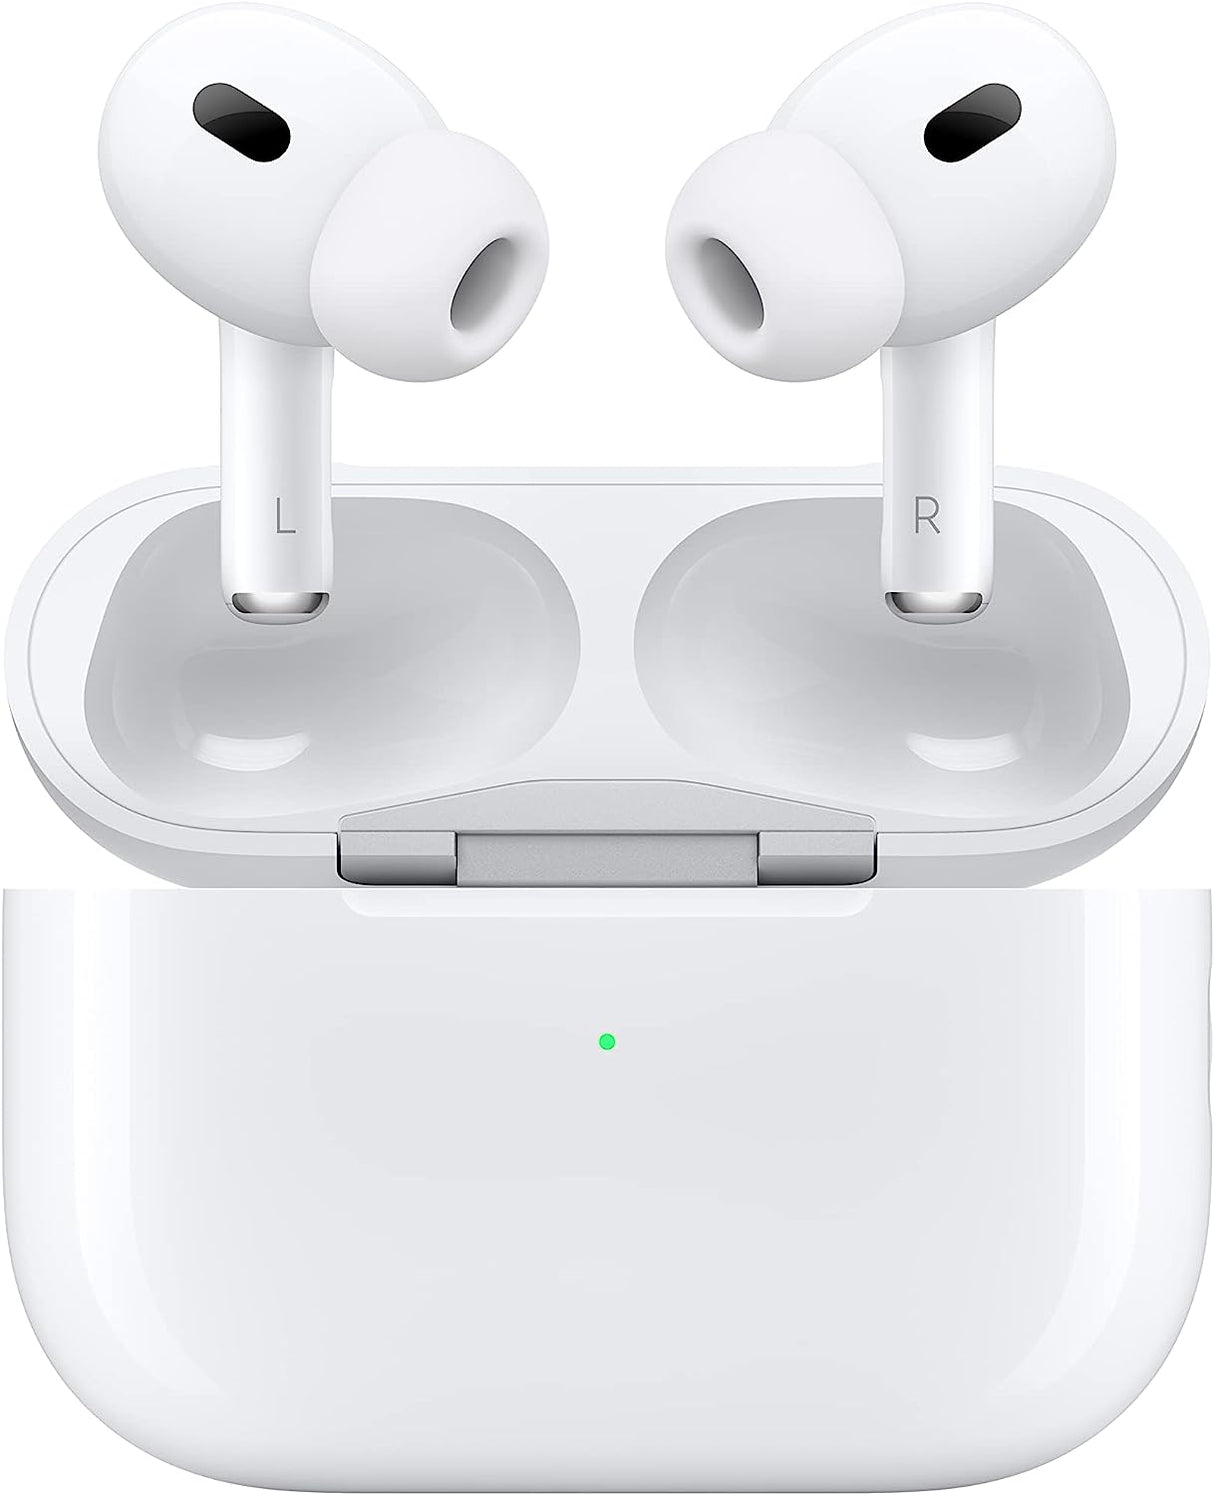 Apple AirPods Pro (2nd Gen) Wireless Earbuds MagSafe Charging Case (USB-C)